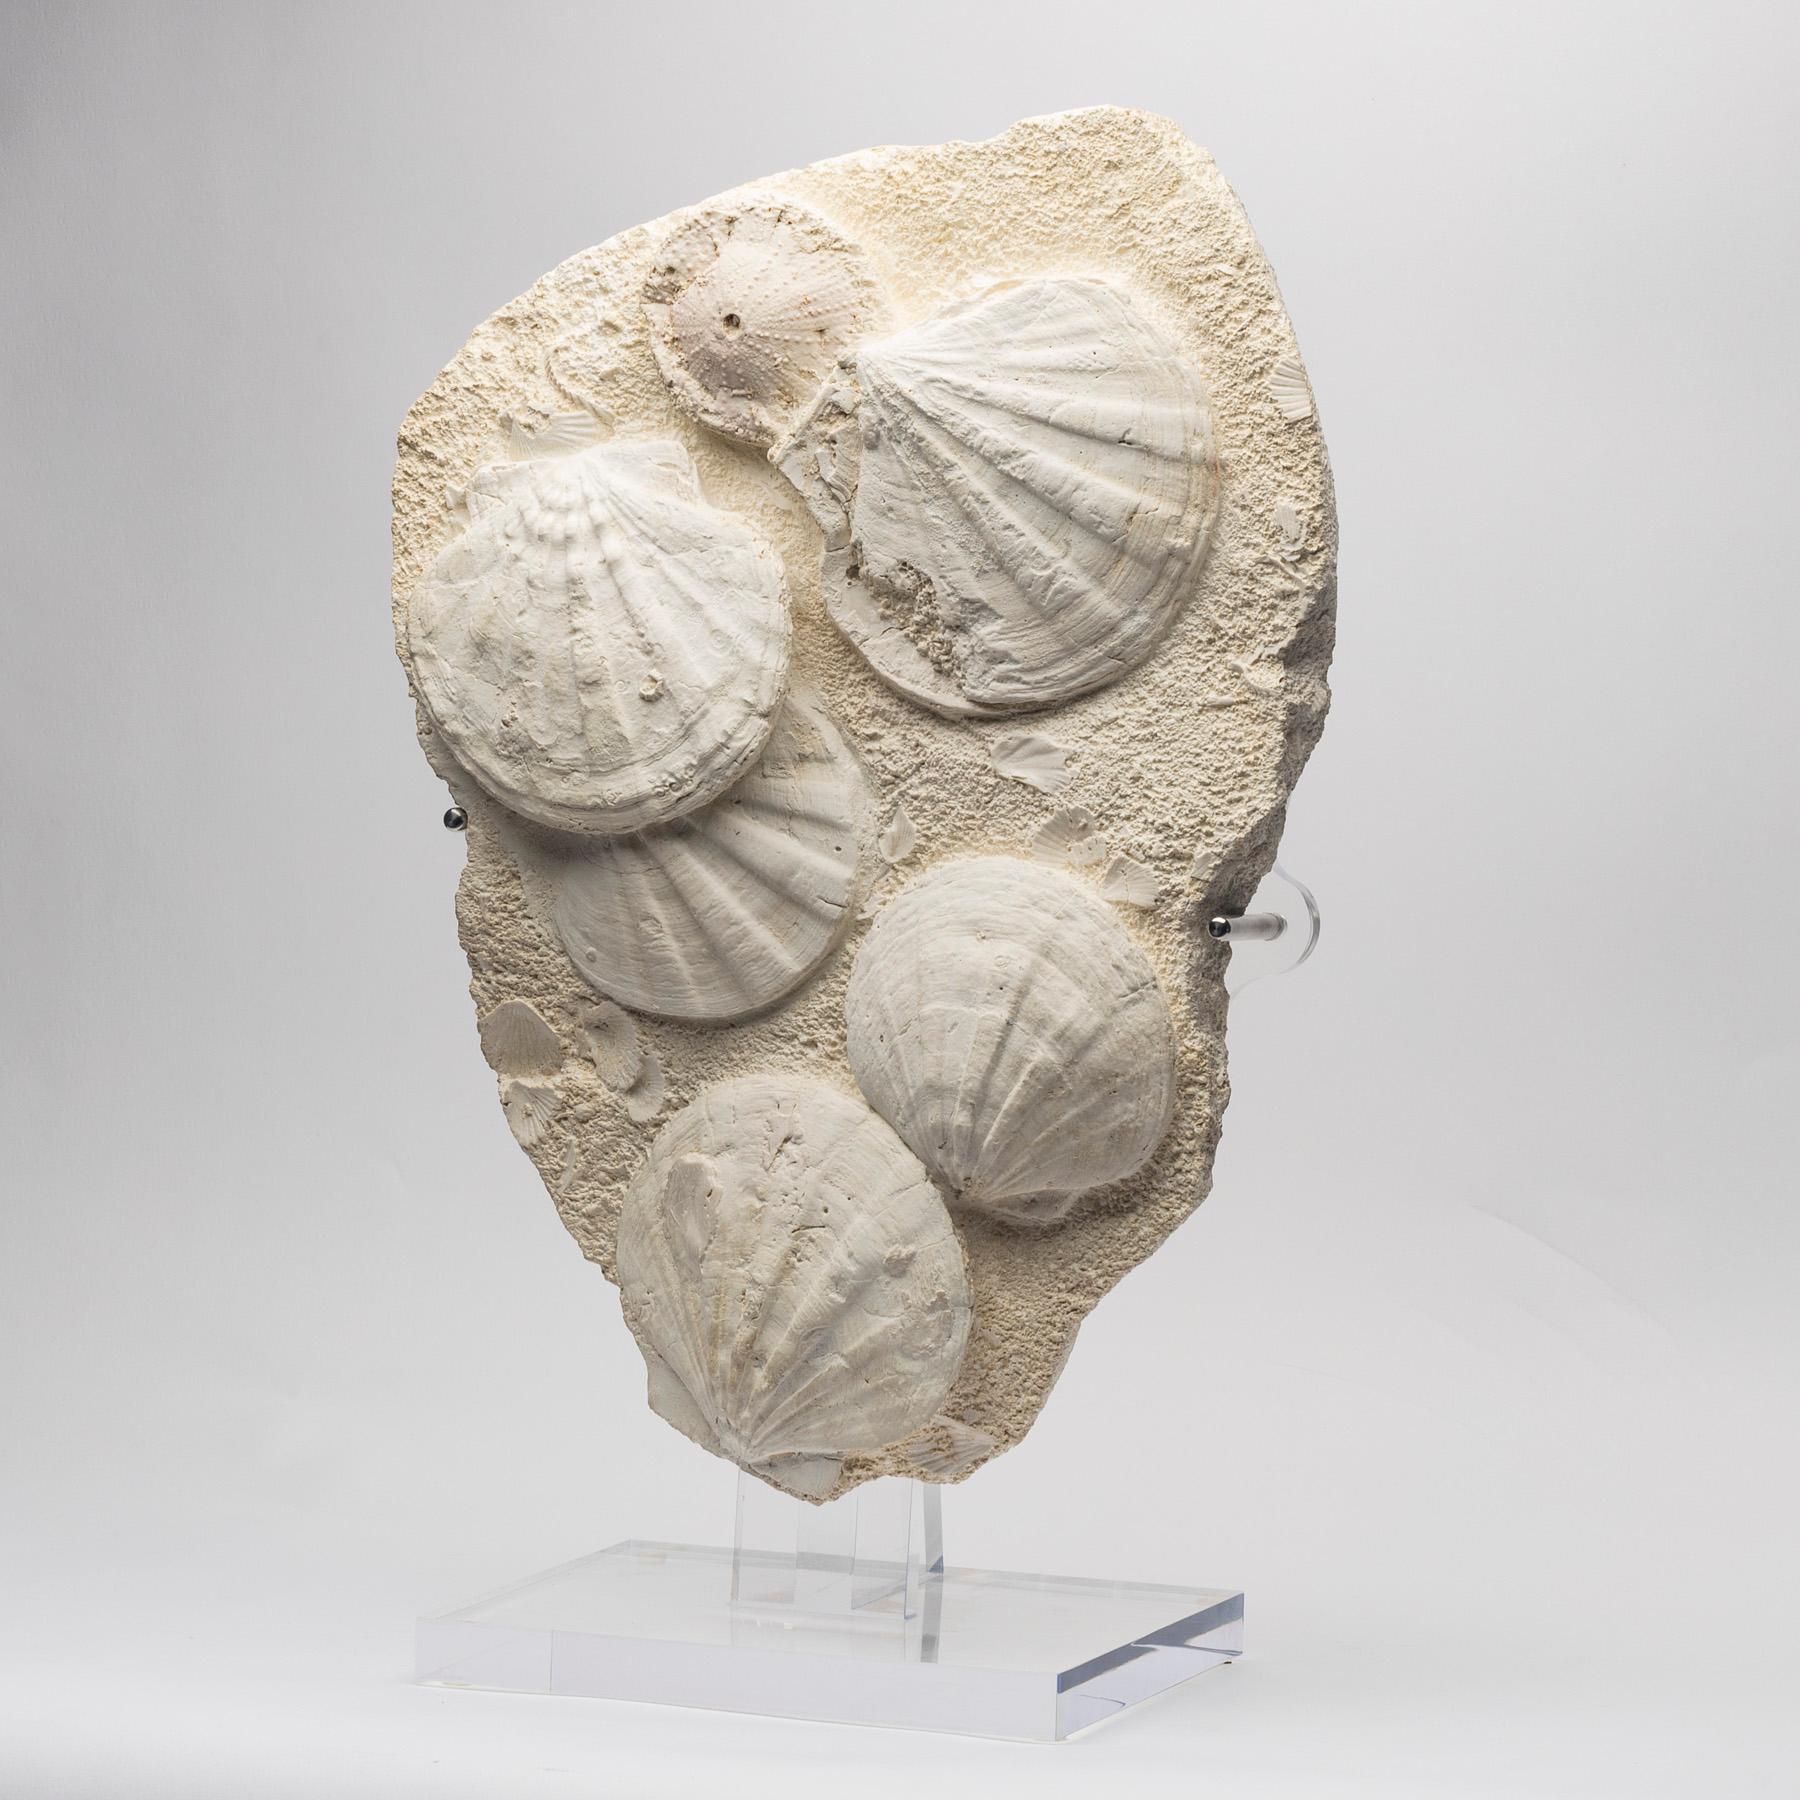 Spectacular Fossil Pecten plate, these extinct mollusks are familiar to what we now today as sea scallops.
It´s origin is from D'Angers Region, France.
 During the Miocene epoch, the part of France was submerged beneath a warm, subtropical sea